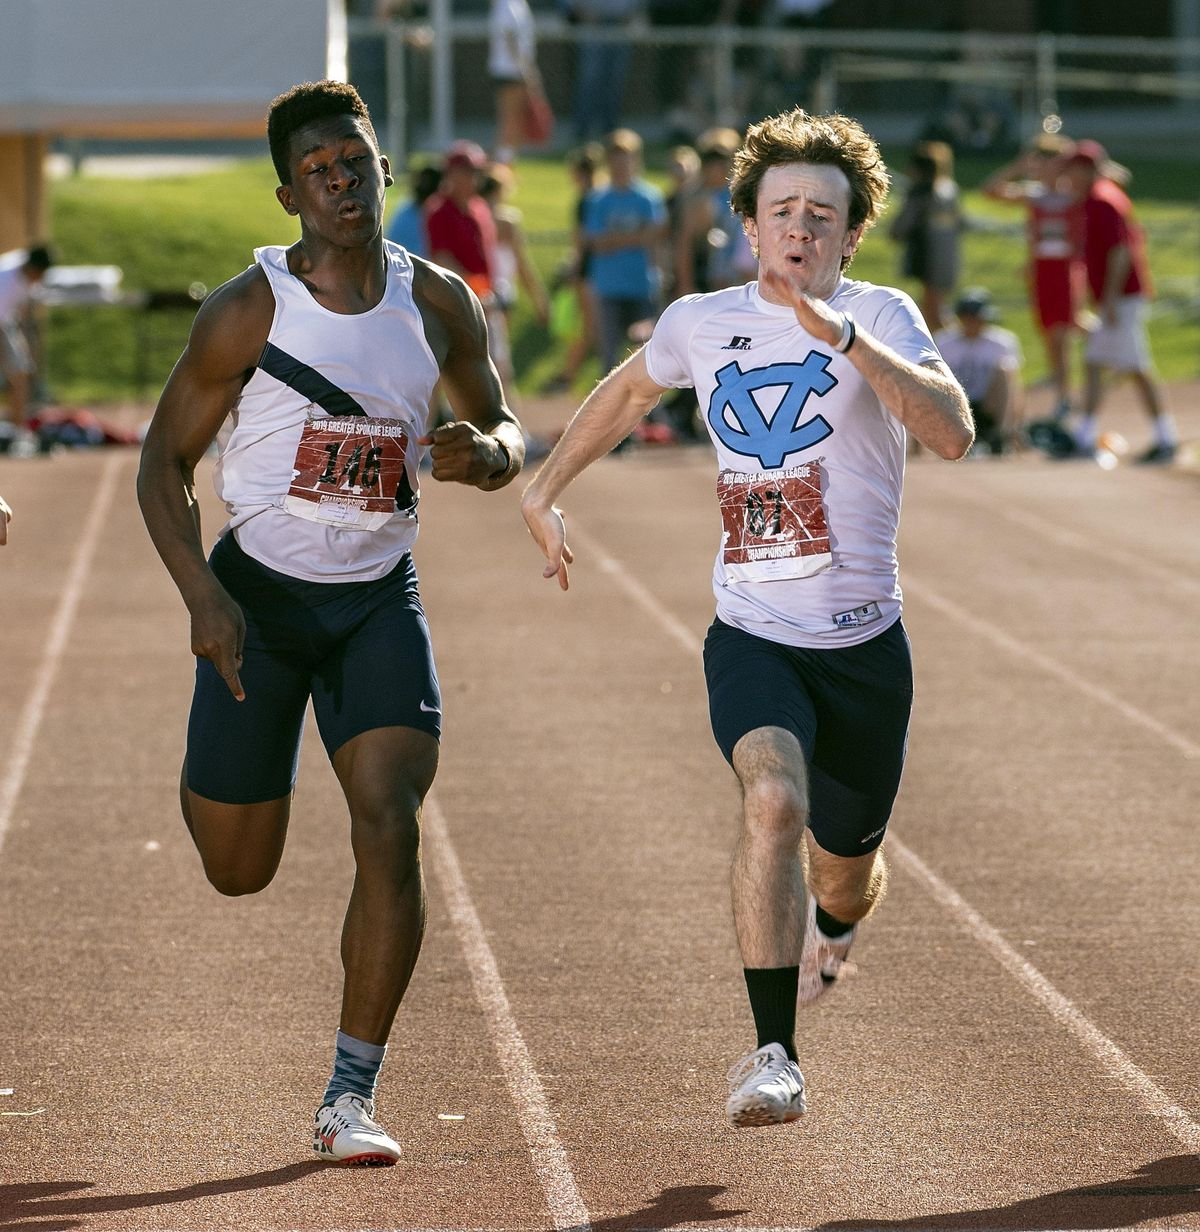 Central Valley’s Austin Porter, on right, edges out Gonzaga Prep’s Xzandre Jean-Francois to win the Boys 4A 100 Meter Dash, Friday, May 9, 2019, during the 2019 GSL League Championship track meet held at Central Valley High School. (Colin Mulvany / The Spokesman-Review)